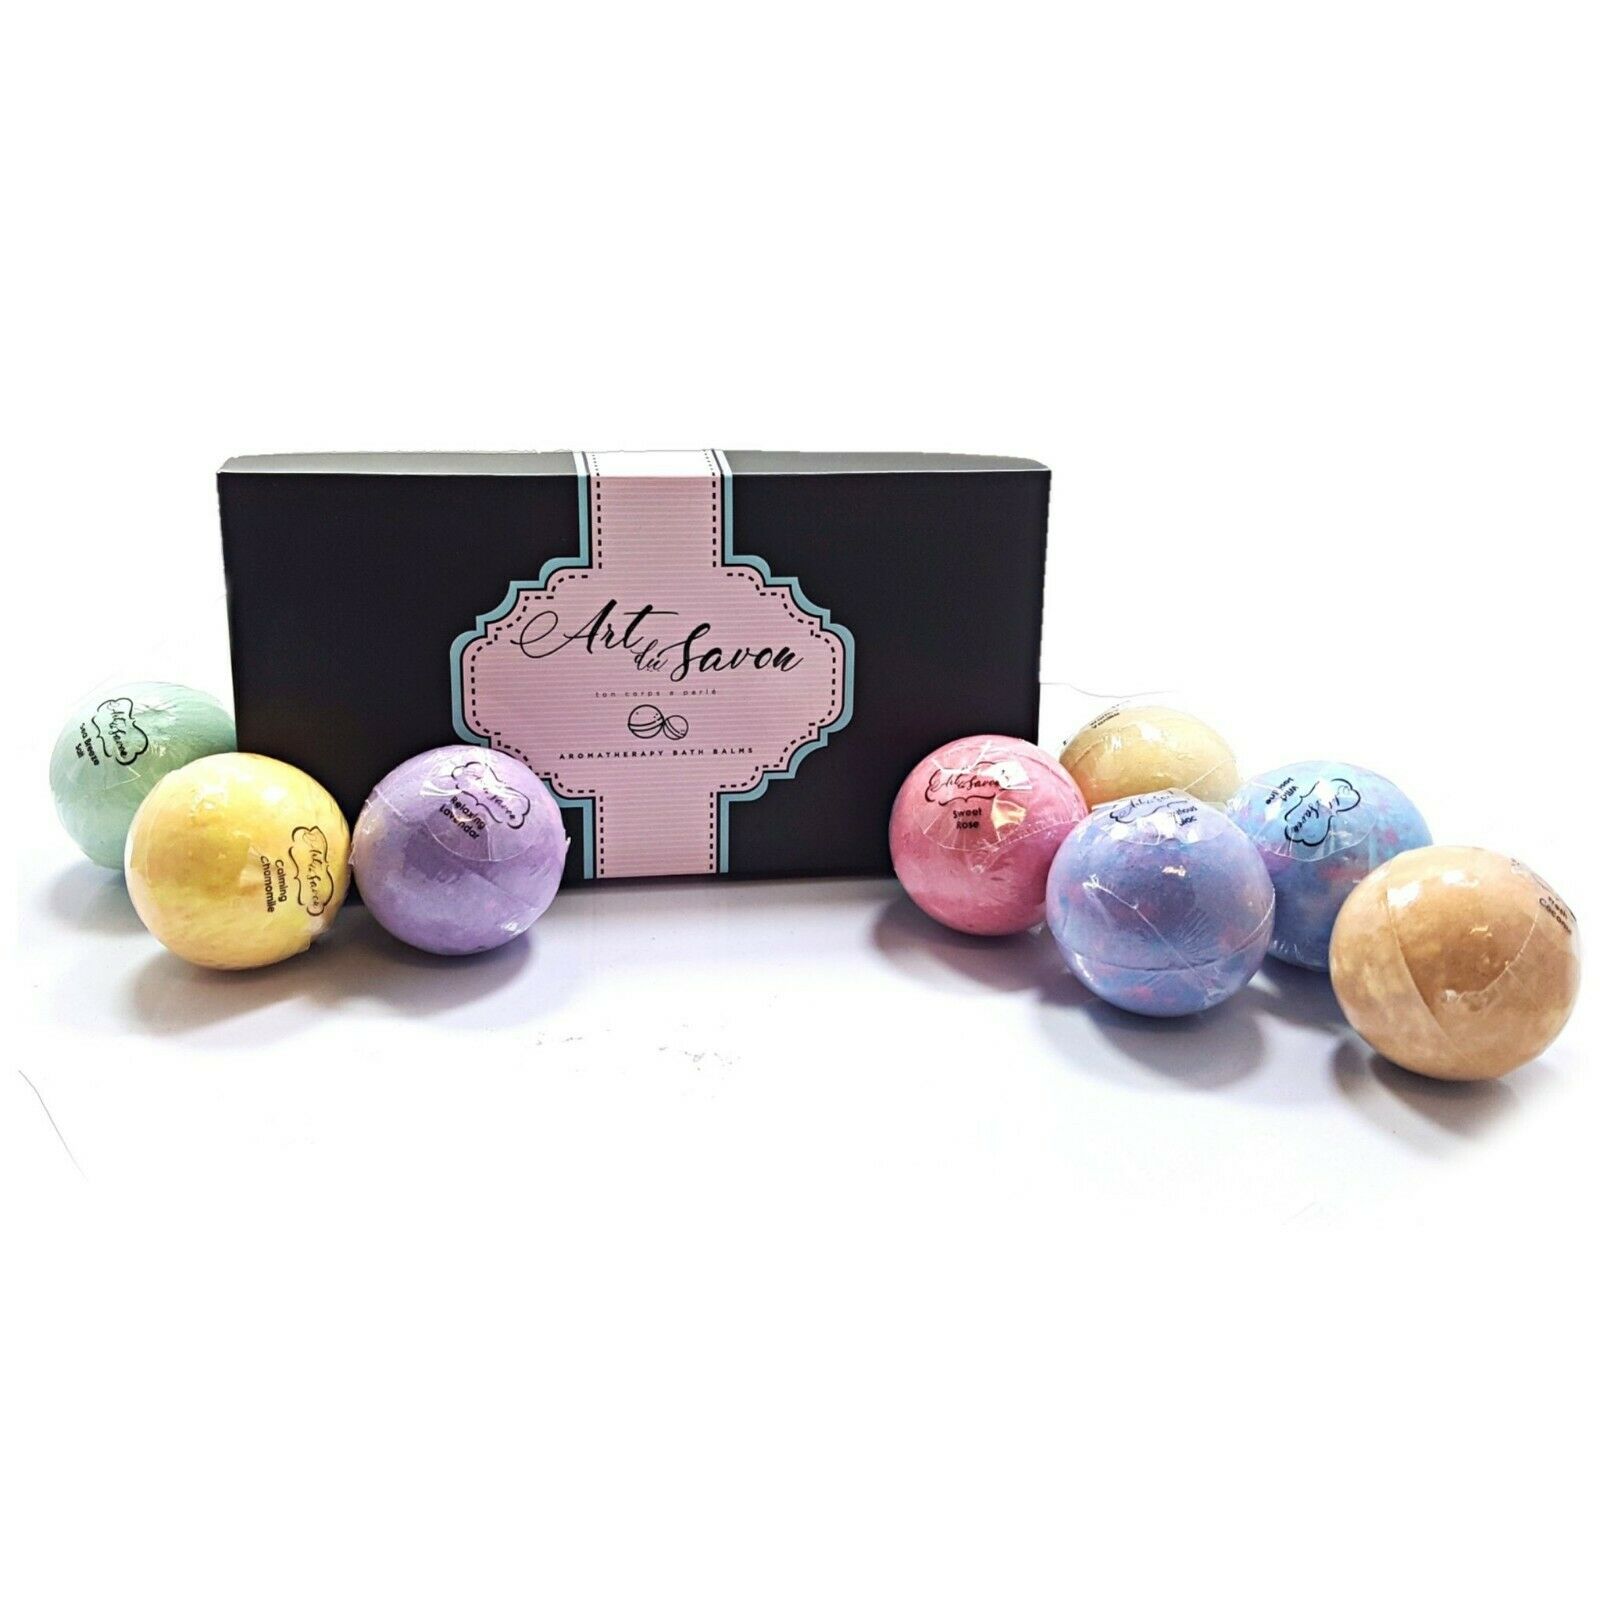 ISO Beauty Presents Art Du Savon 8pc Bath Bomb Luxury Gift Set Soothe Your Stressed Body and Mind While The Bath Bombs Releasing Bursts Of Uplifting Fragrance While Conditioning Skin With Shea Butter - image 1 of 2